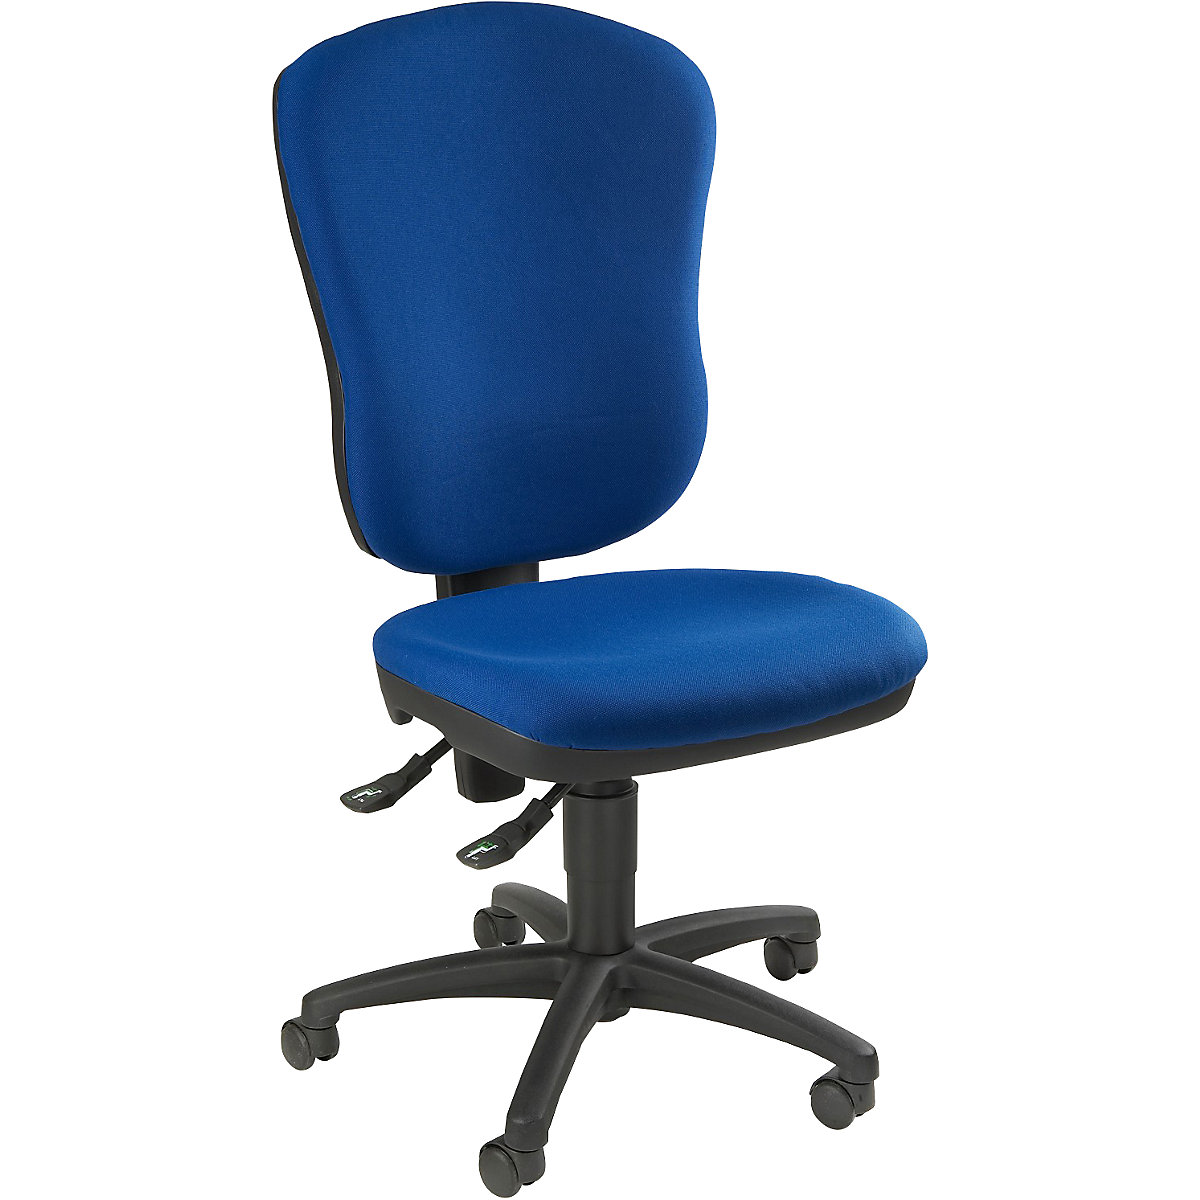 Standard swivel chair – Topstar, without arm rests, with lumbar support, back rest height 570 mm, royal blue covering-2